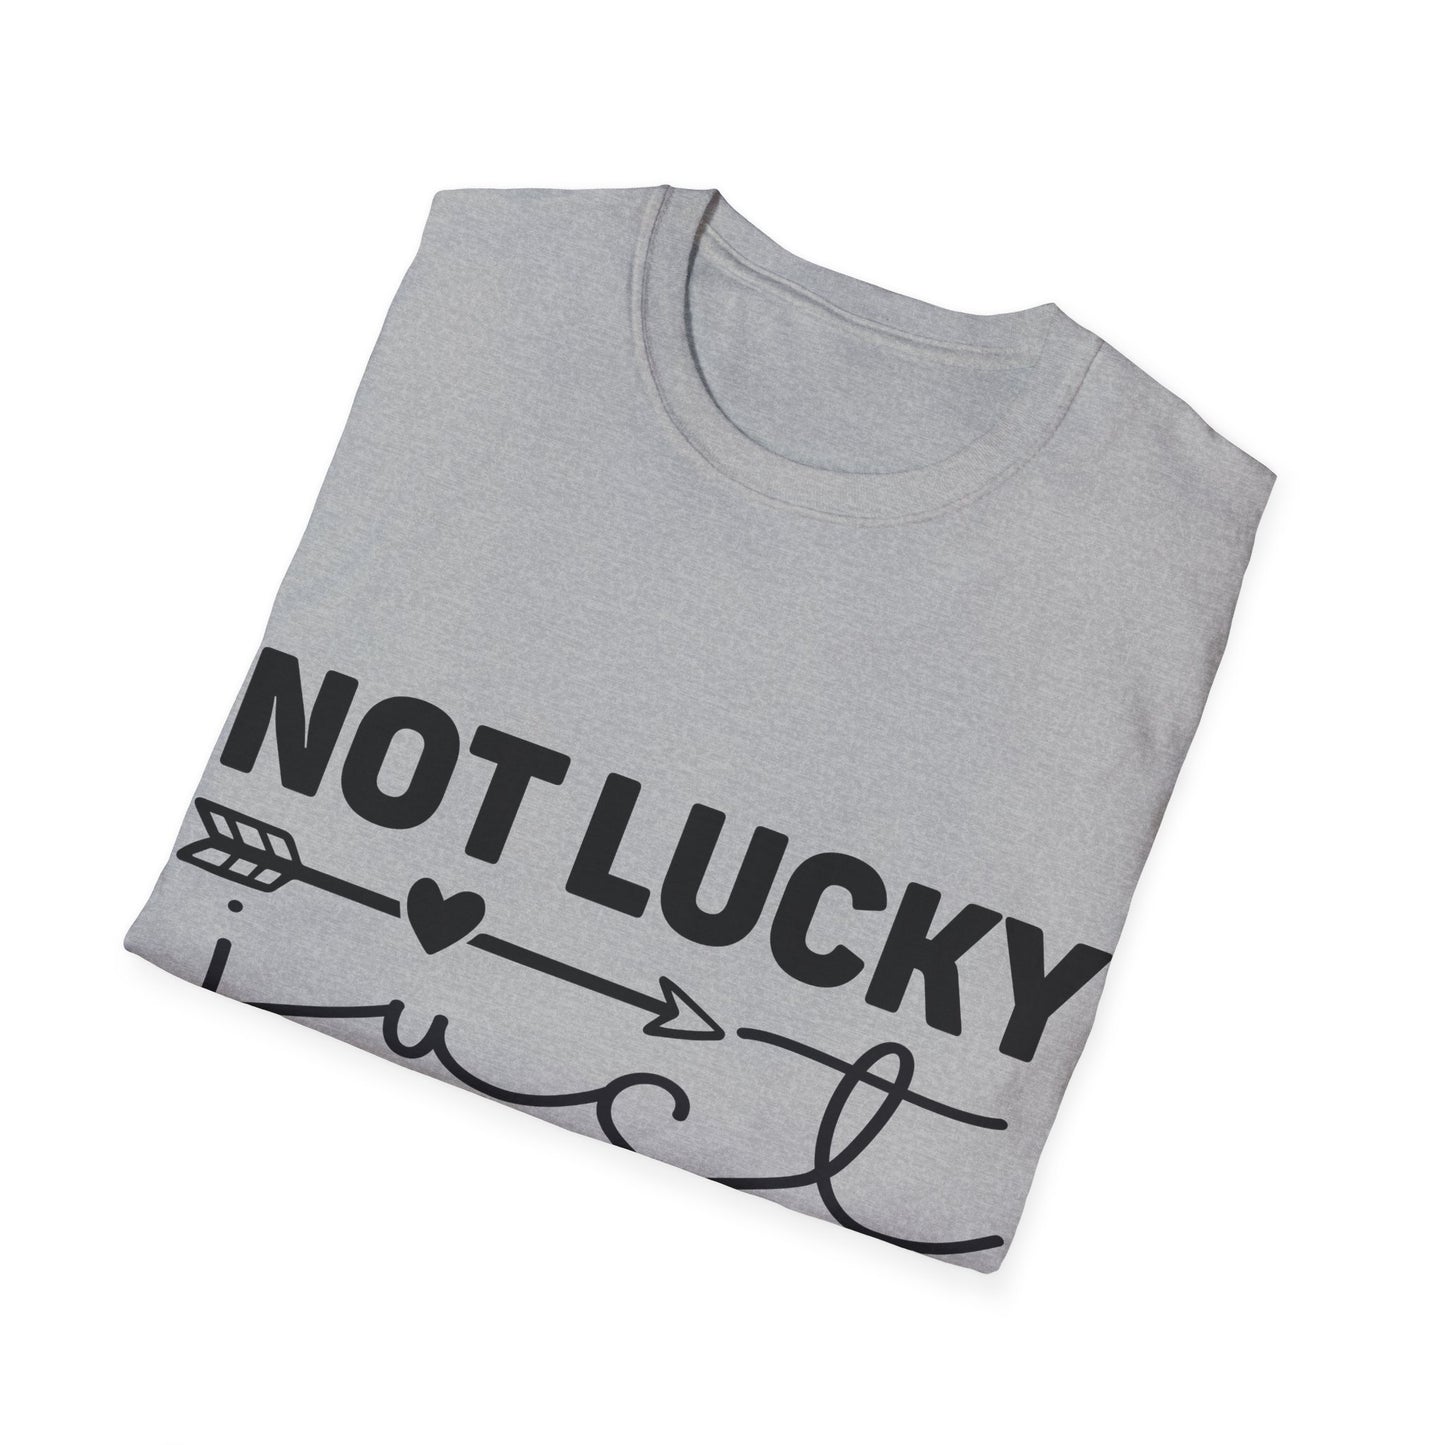 Not Lucky Just Blessed Triple Viking T-Shirt